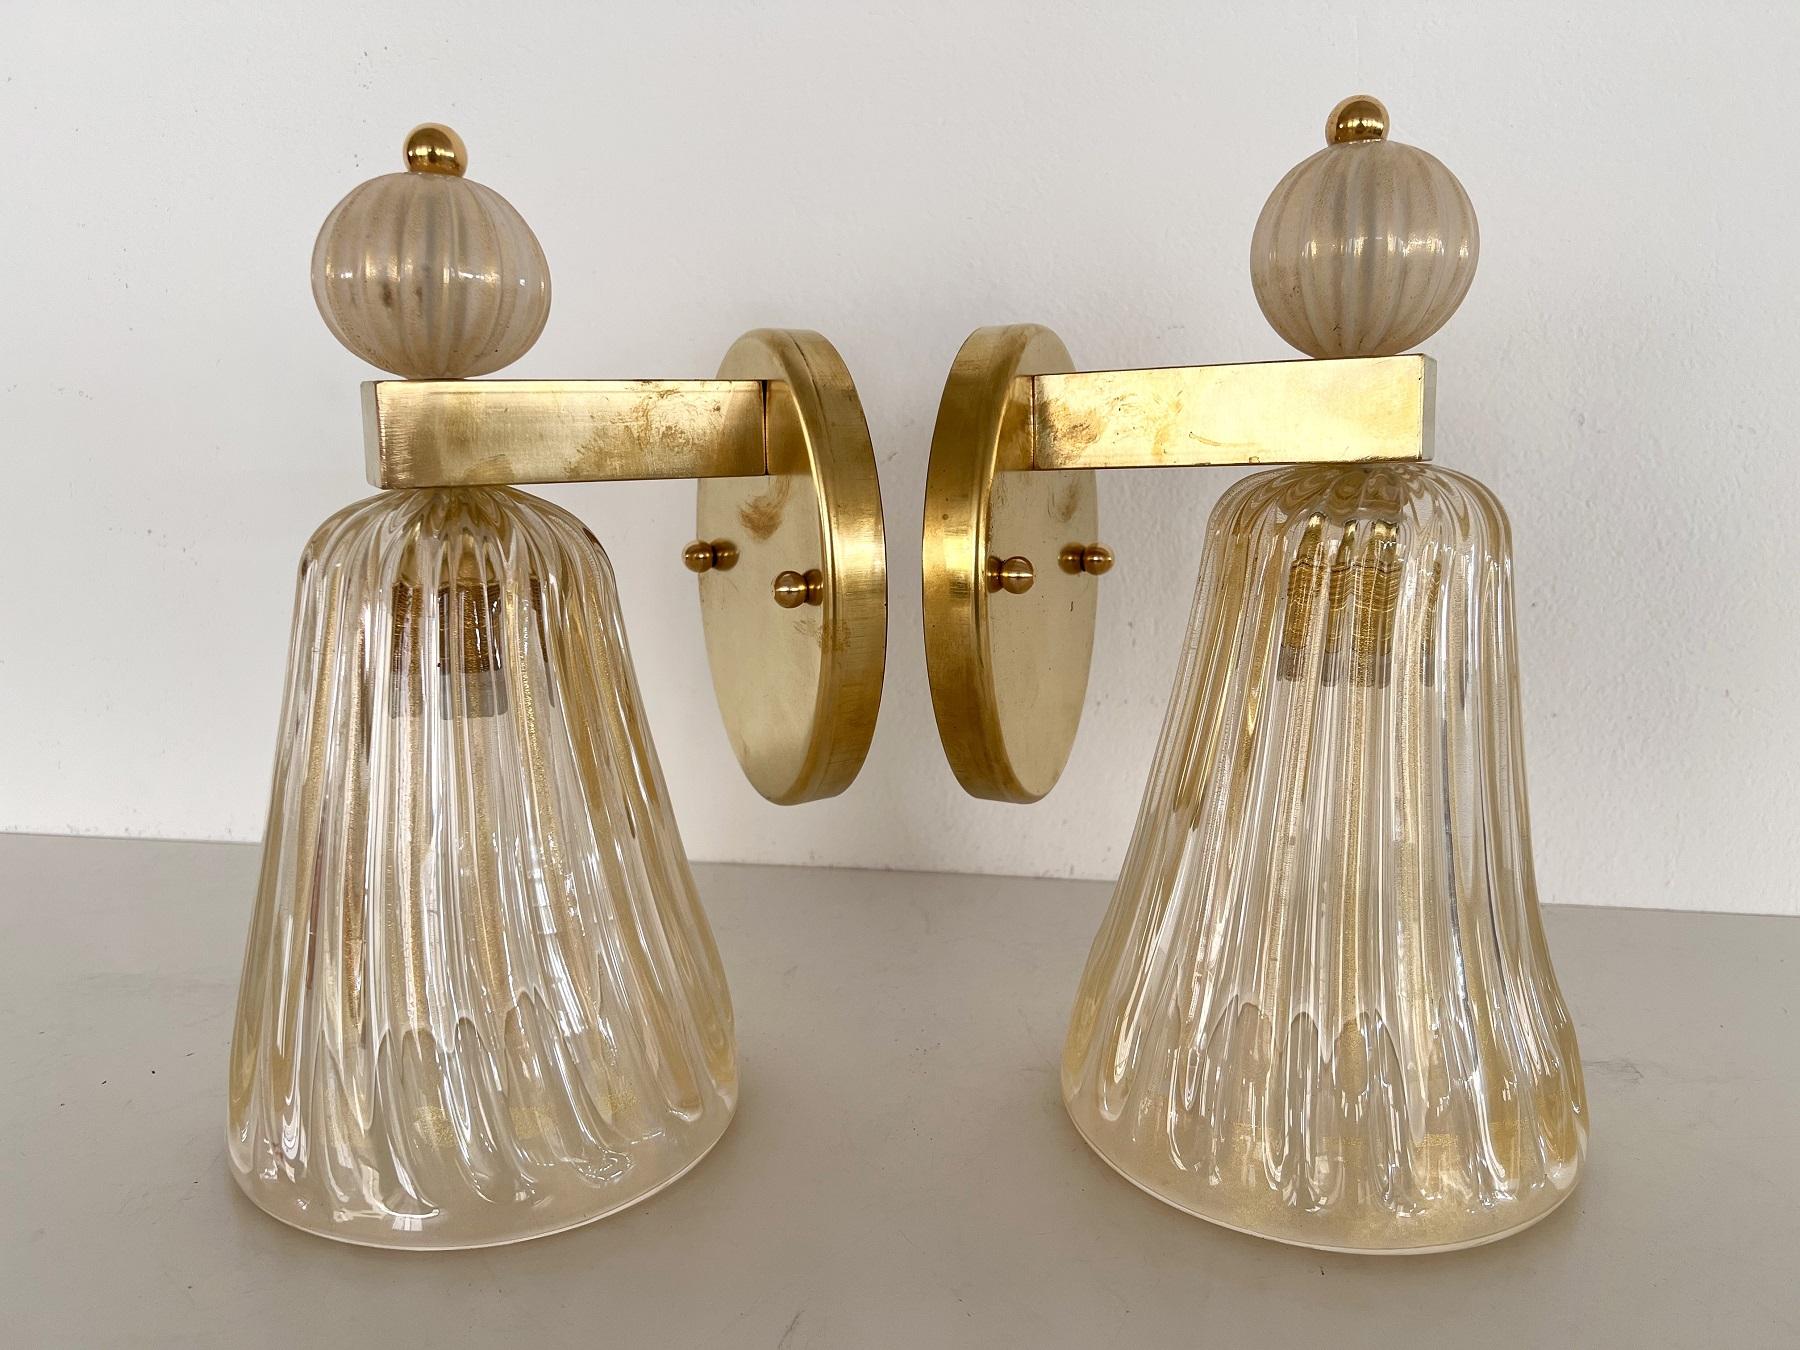 Italian Brass and Murano Glass Wall Lights or Sconces in Art Deco Style, 1990s For Sale 4